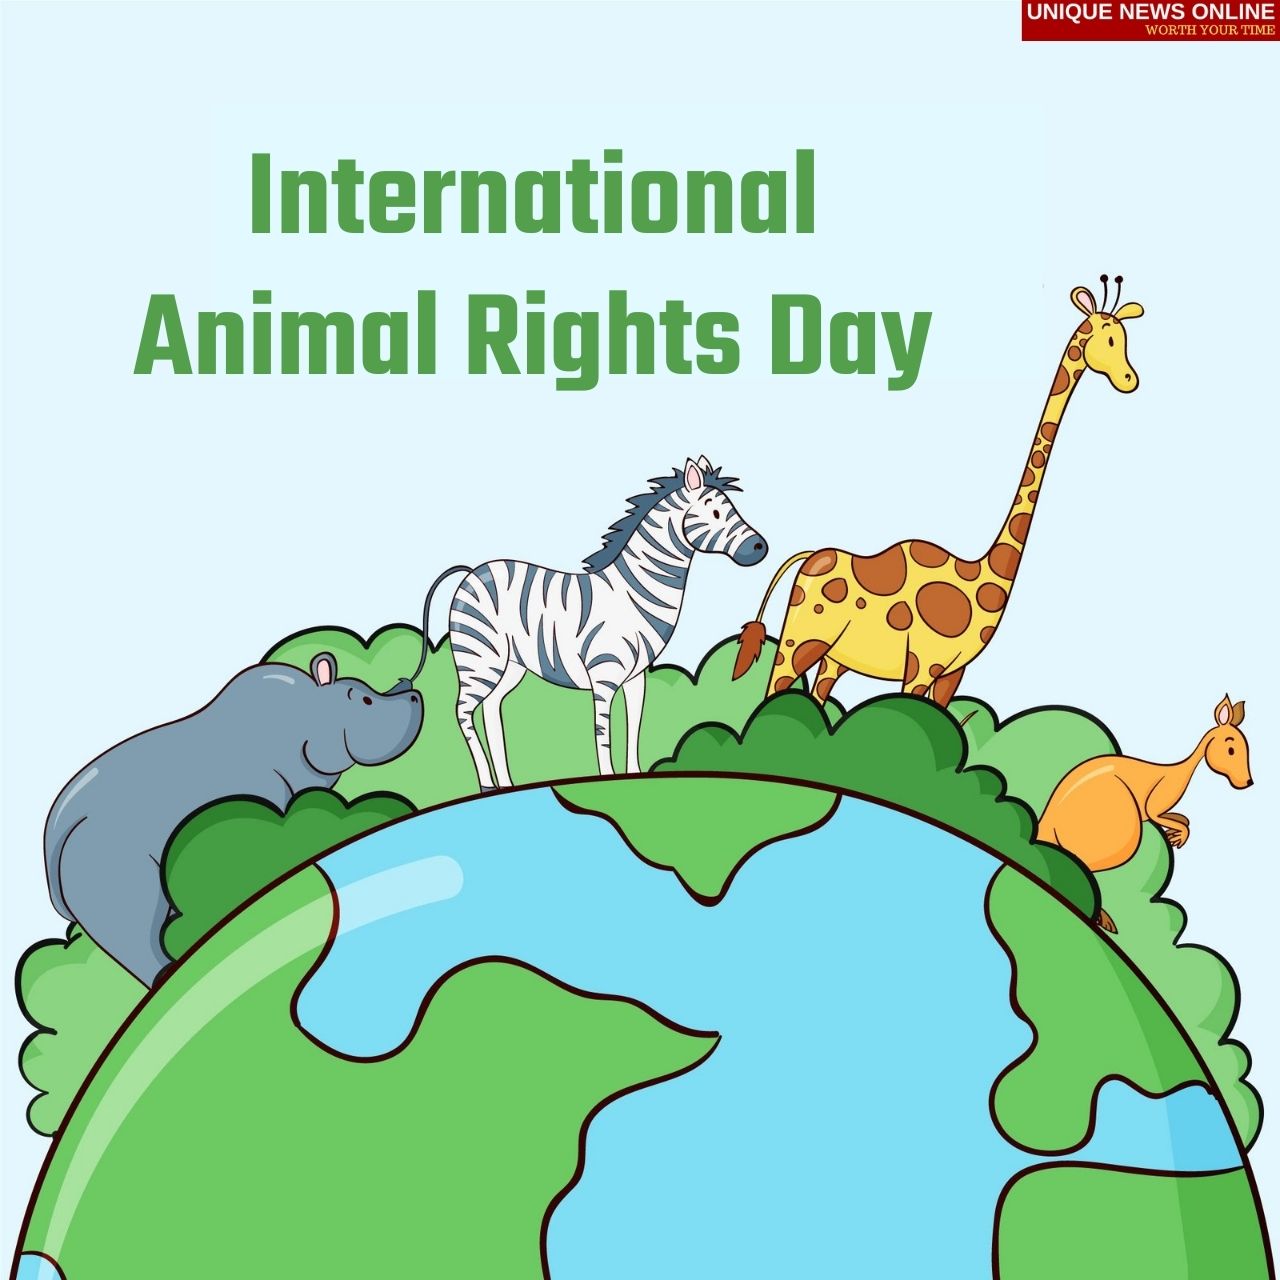 International Animal Rights Day 2021 Quotes, Images, Messages, Slogans, and  Posters to create awareness